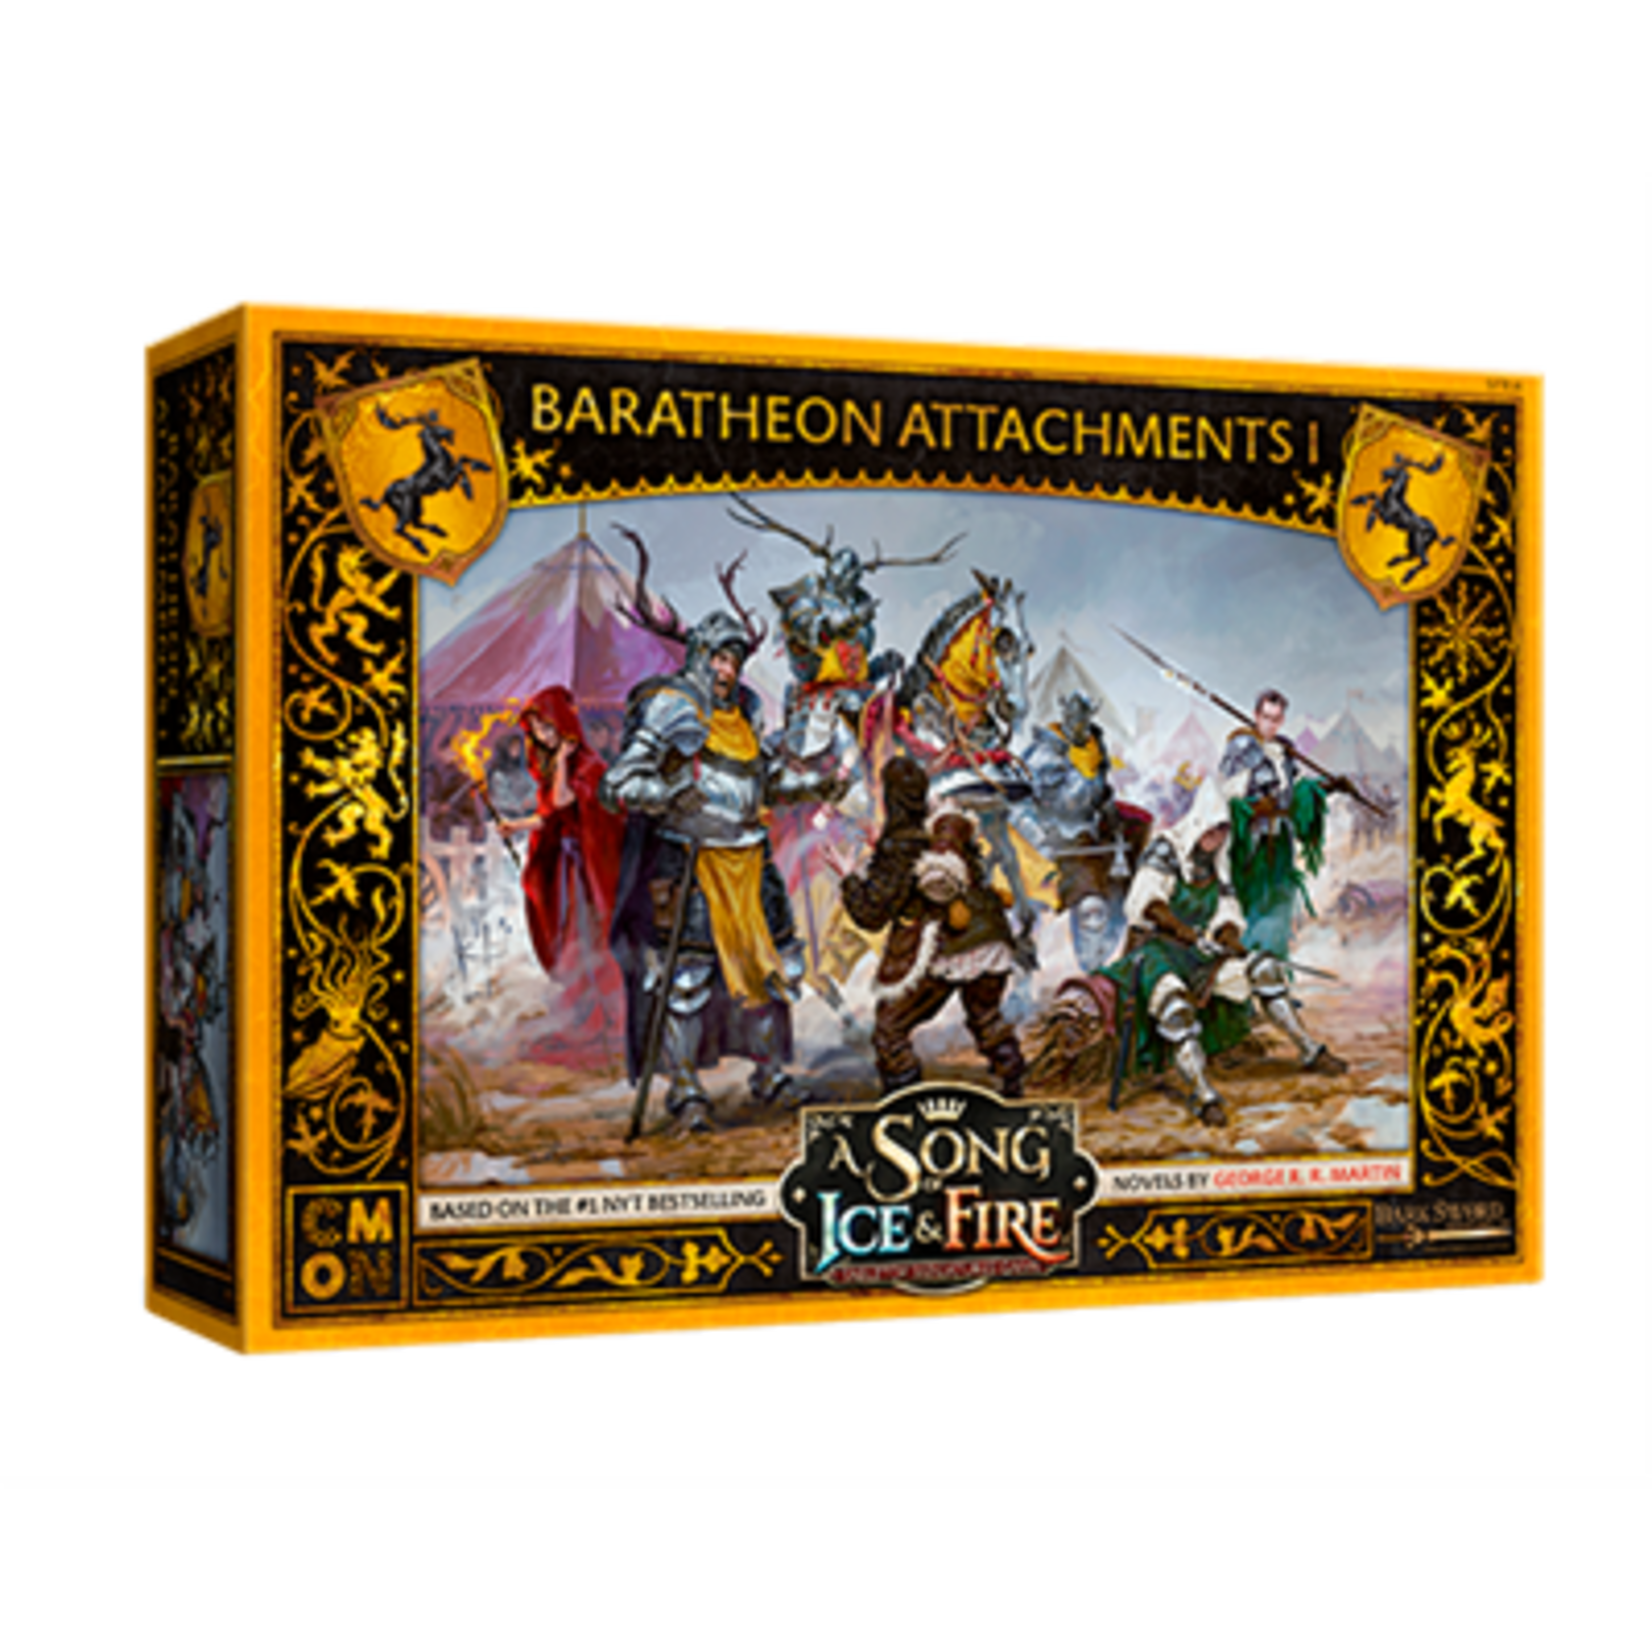 Asmodee A Song of Ice & Fire - Baratheon Attachments #1